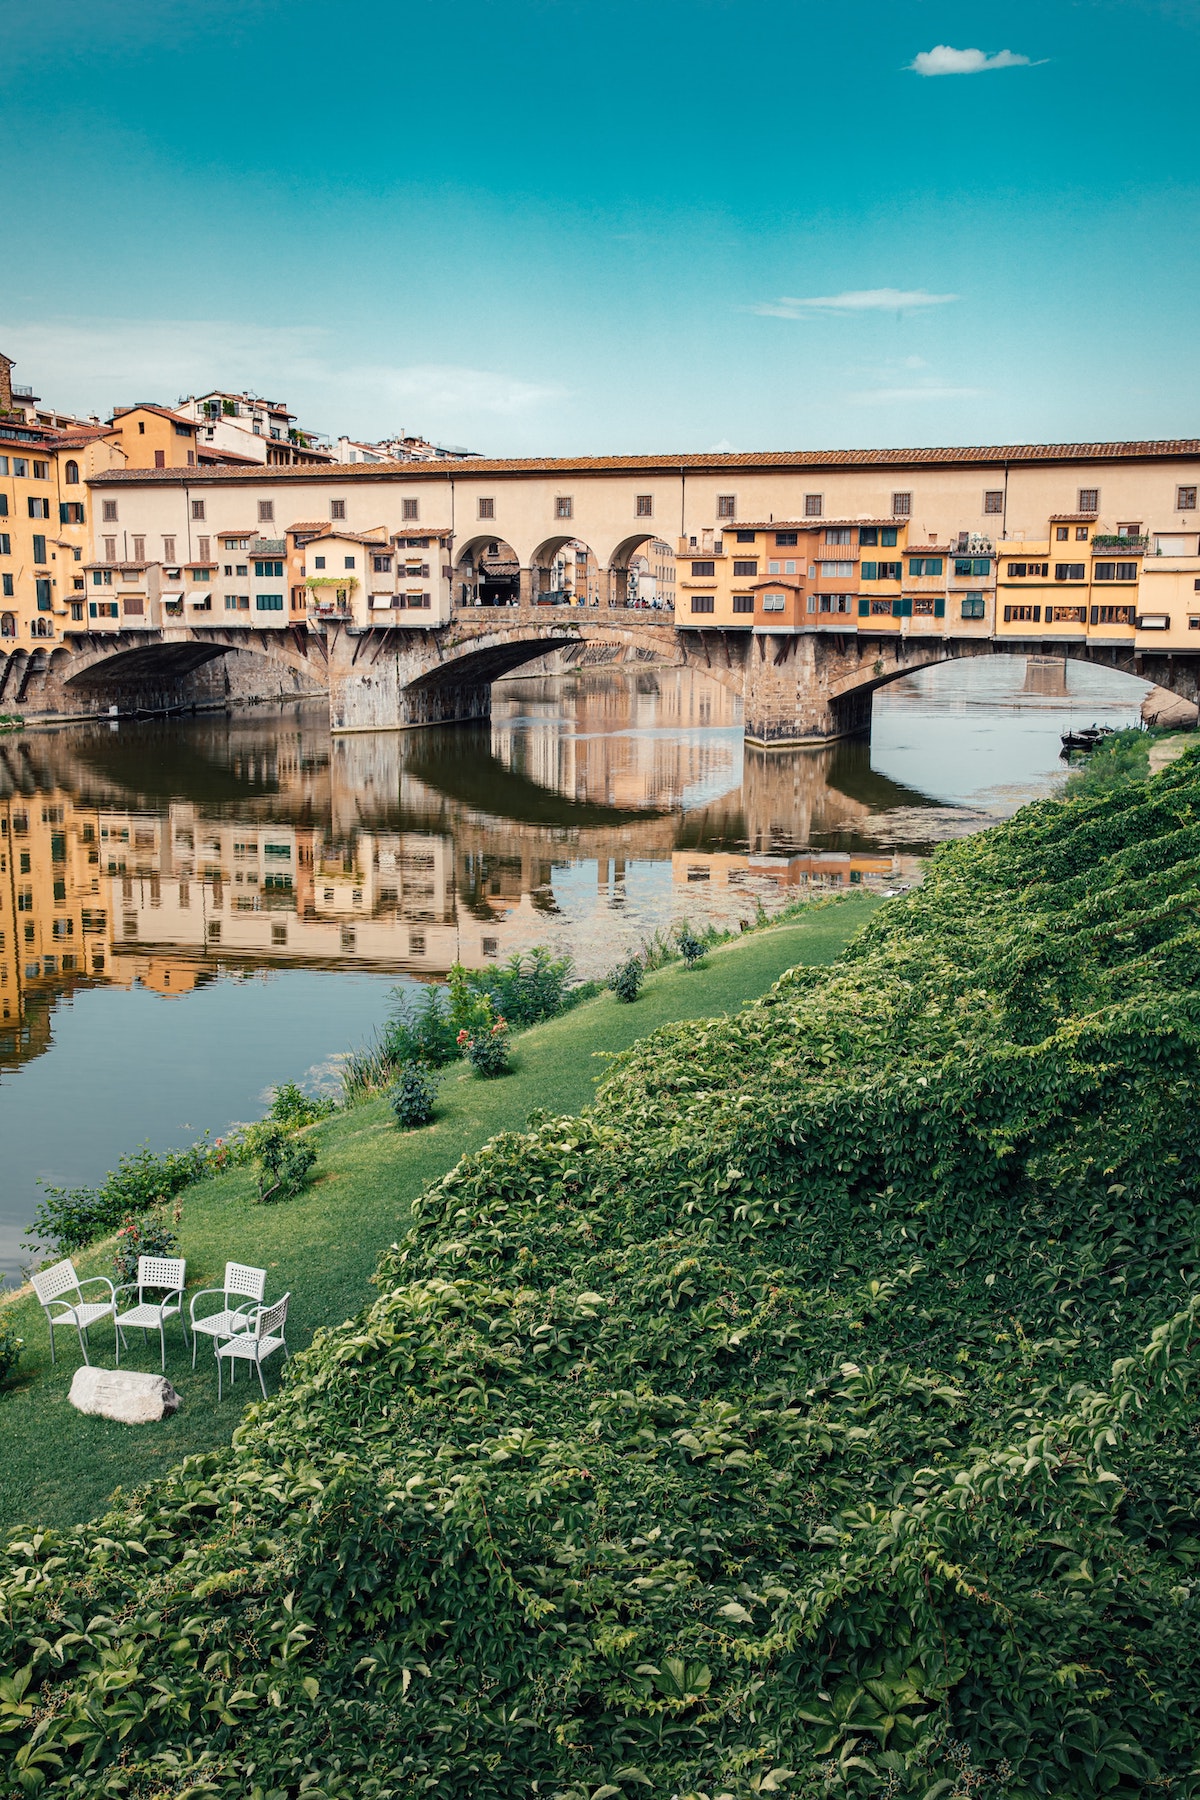 View of Ponte Vecchio bridge in Florence taken from a grassy lawn